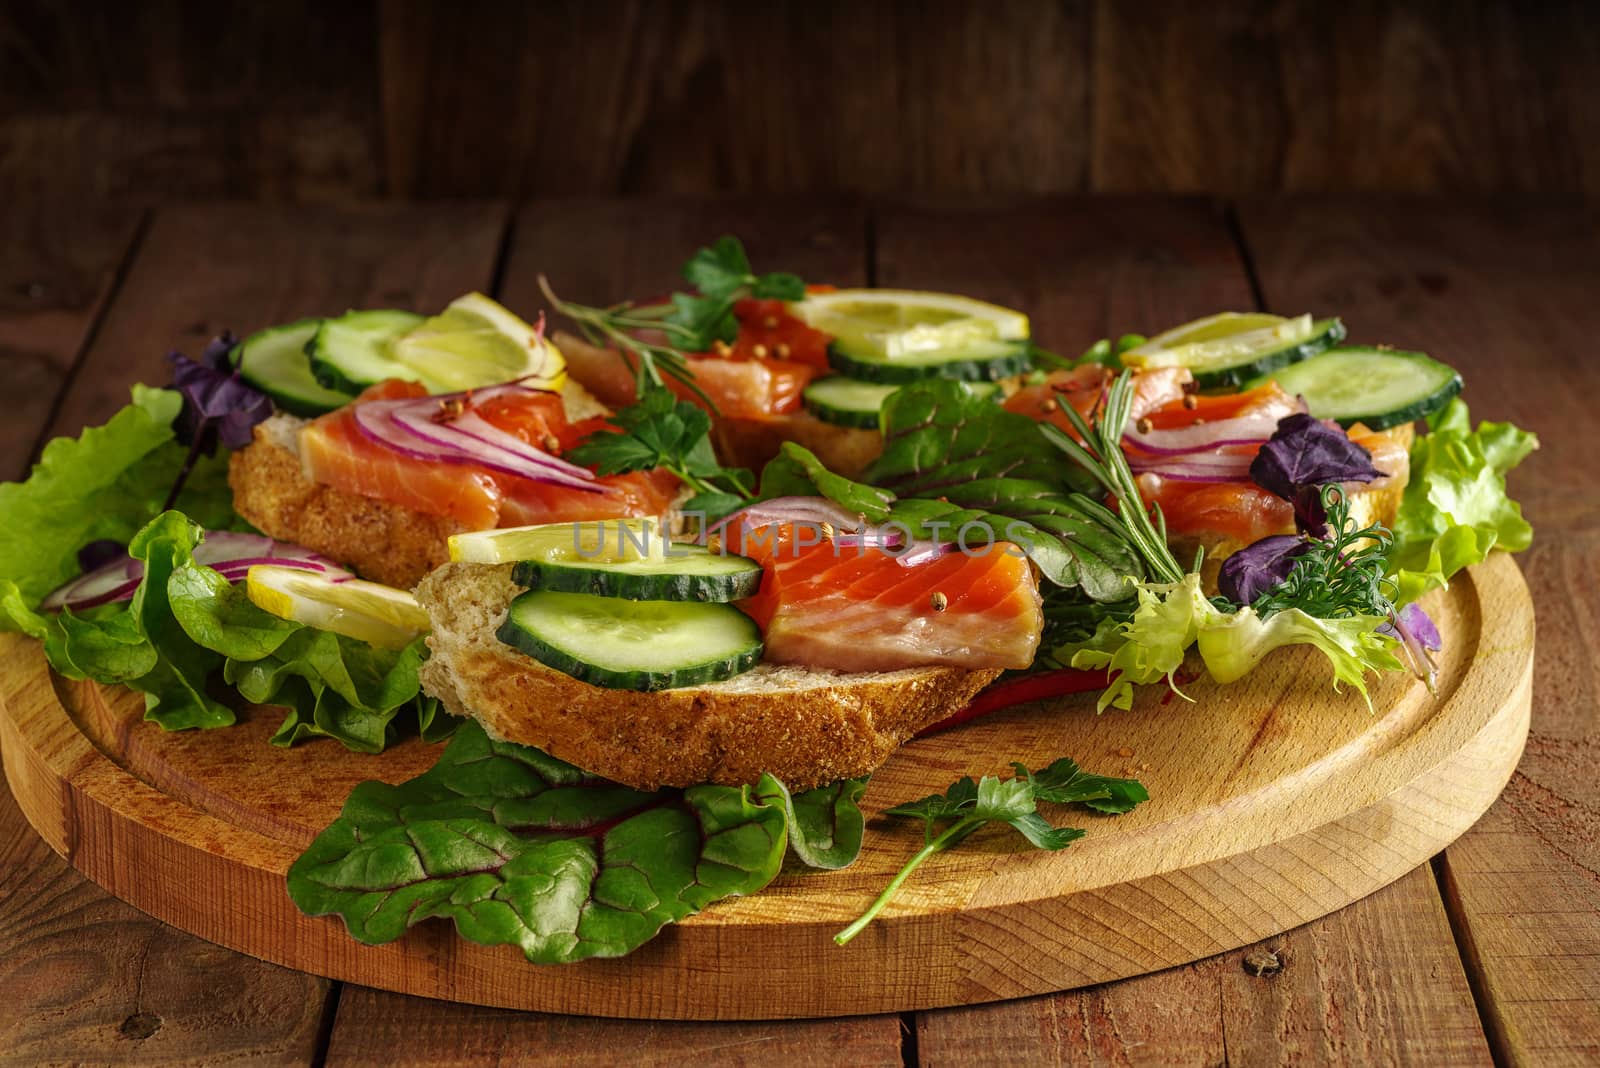 Salmon sandwich with greens, red onions and spices on a wooden table.